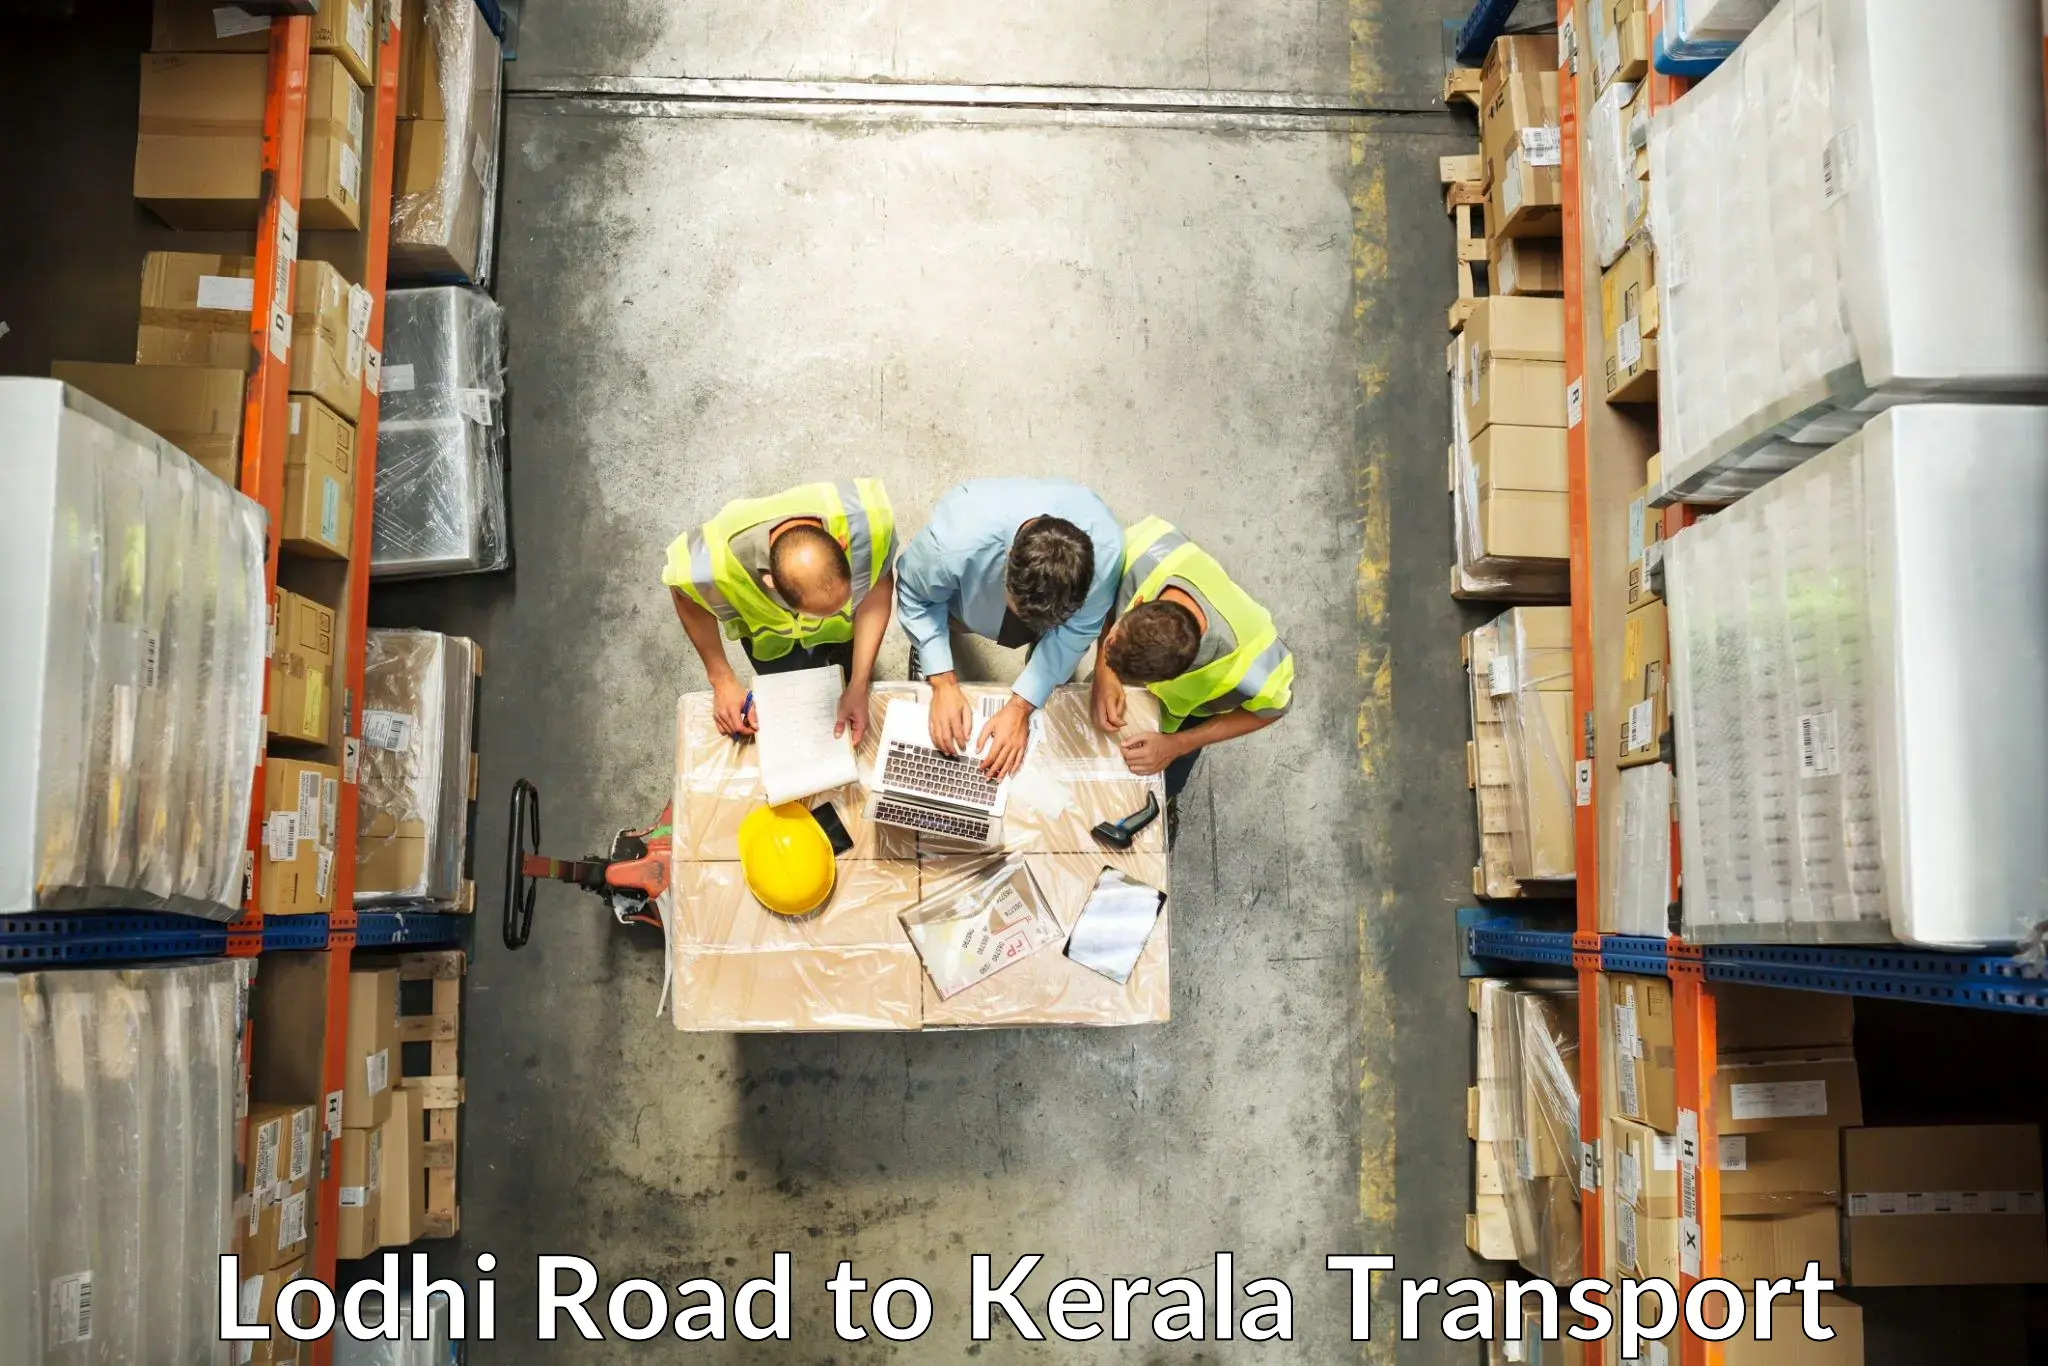 Lorry transport service Lodhi Road to Iritty